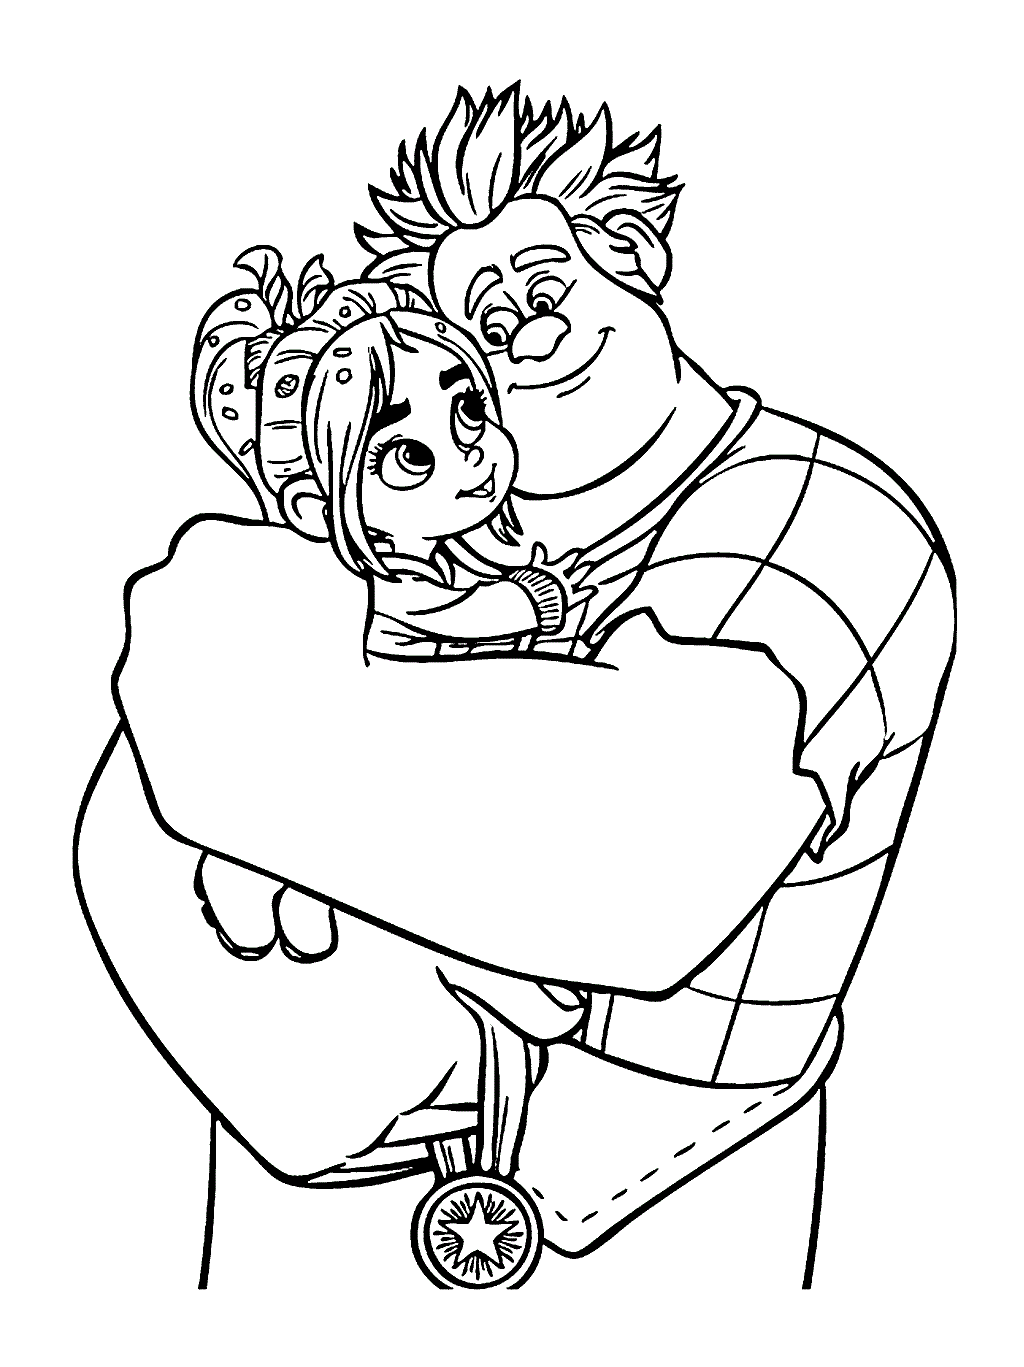 Wreck it Ralph Coloring Picture for Kids